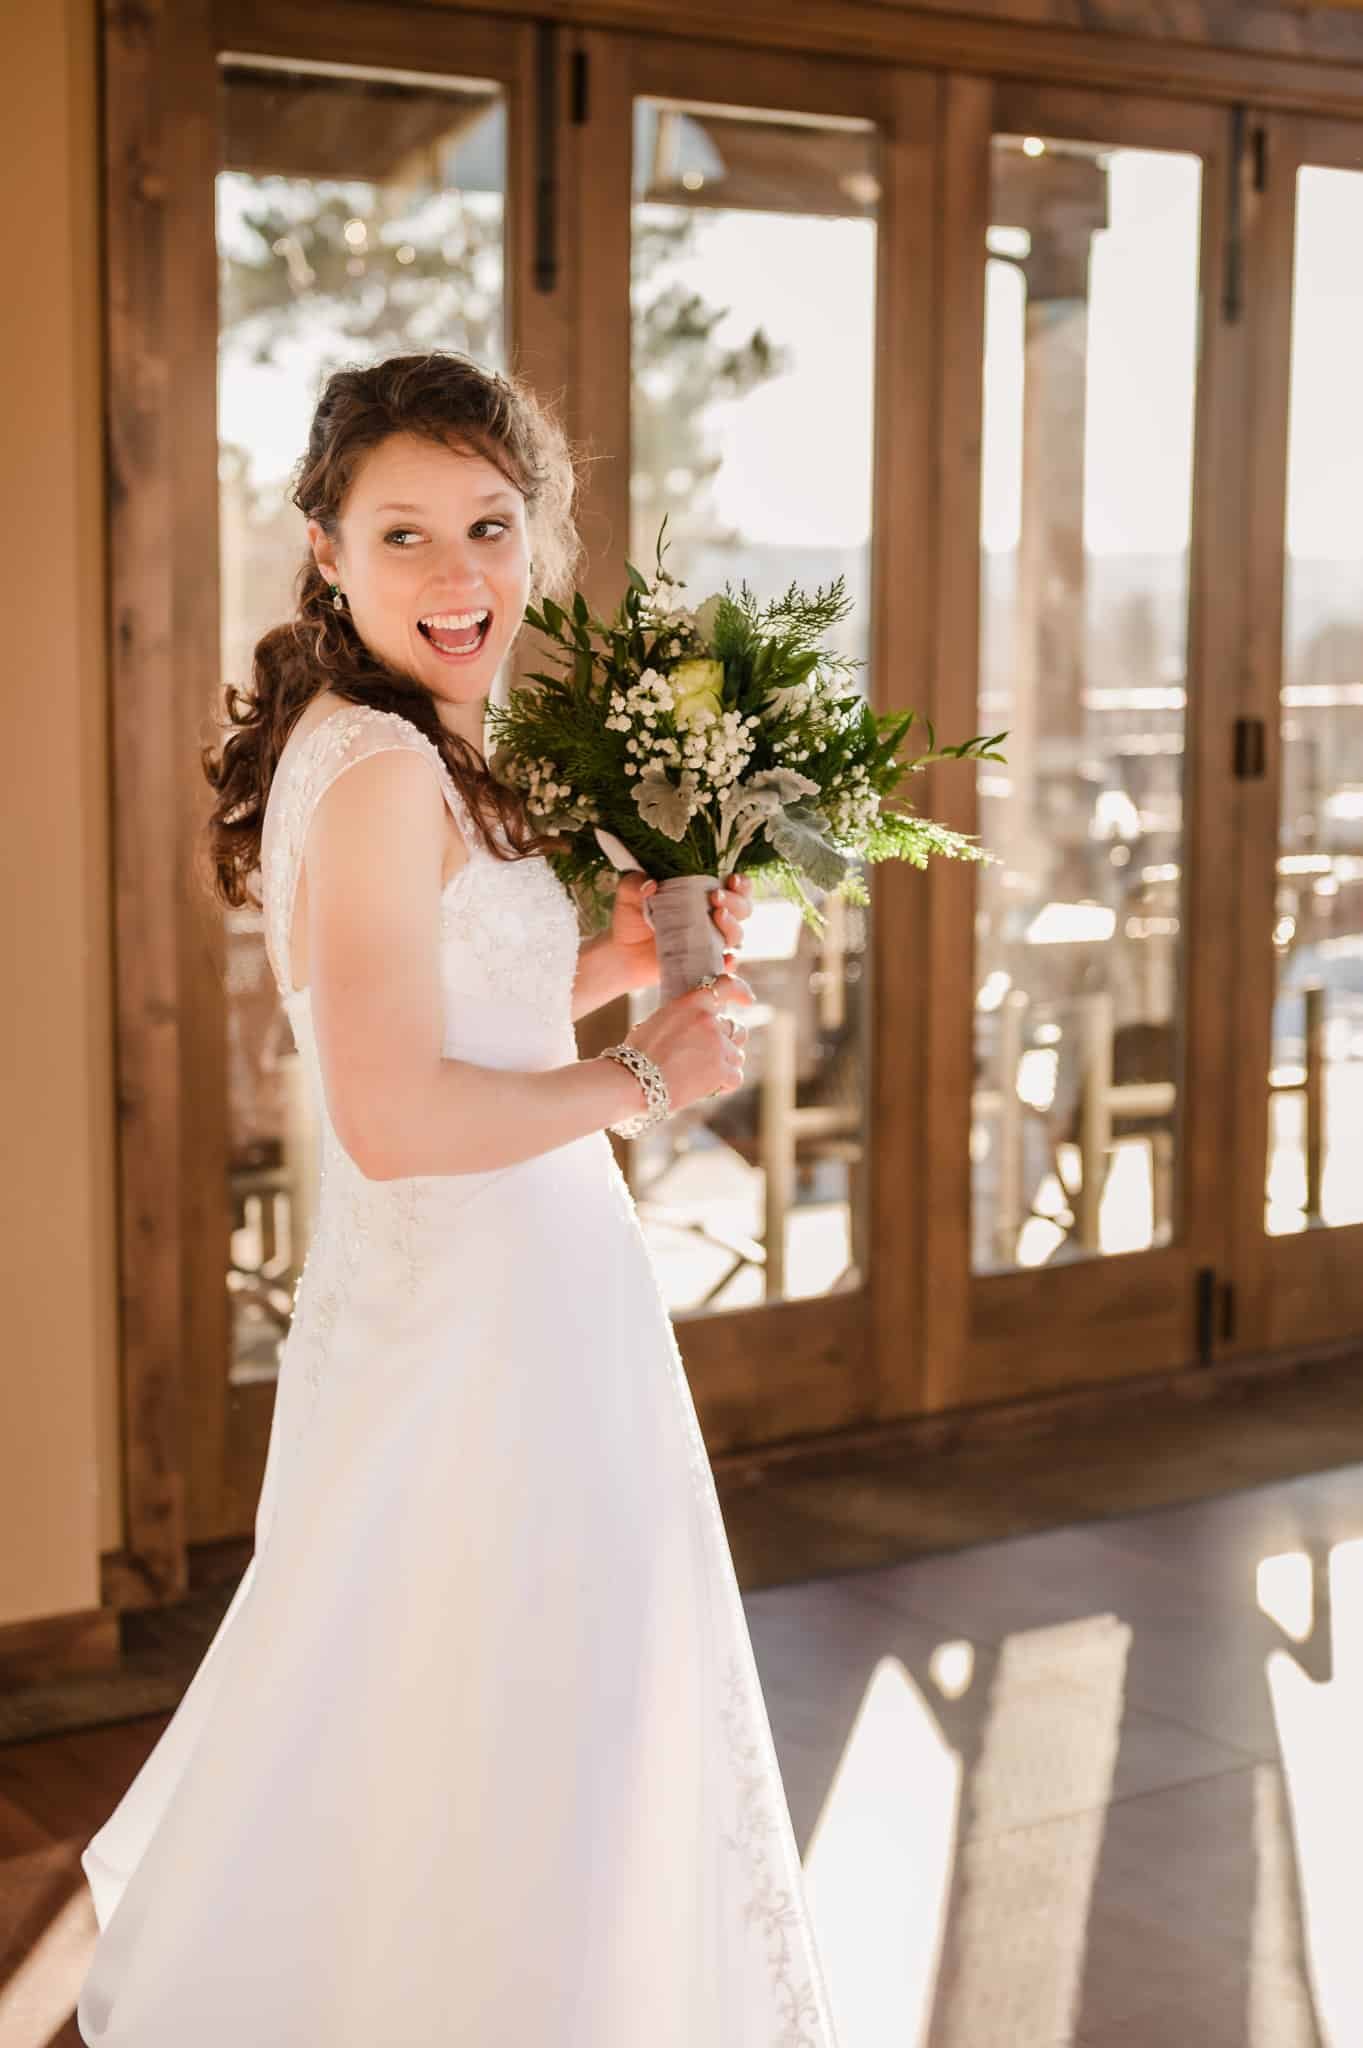 The bride in a sunny alcove prepares to throw her bouquet to the eligible single women in the flower toss.